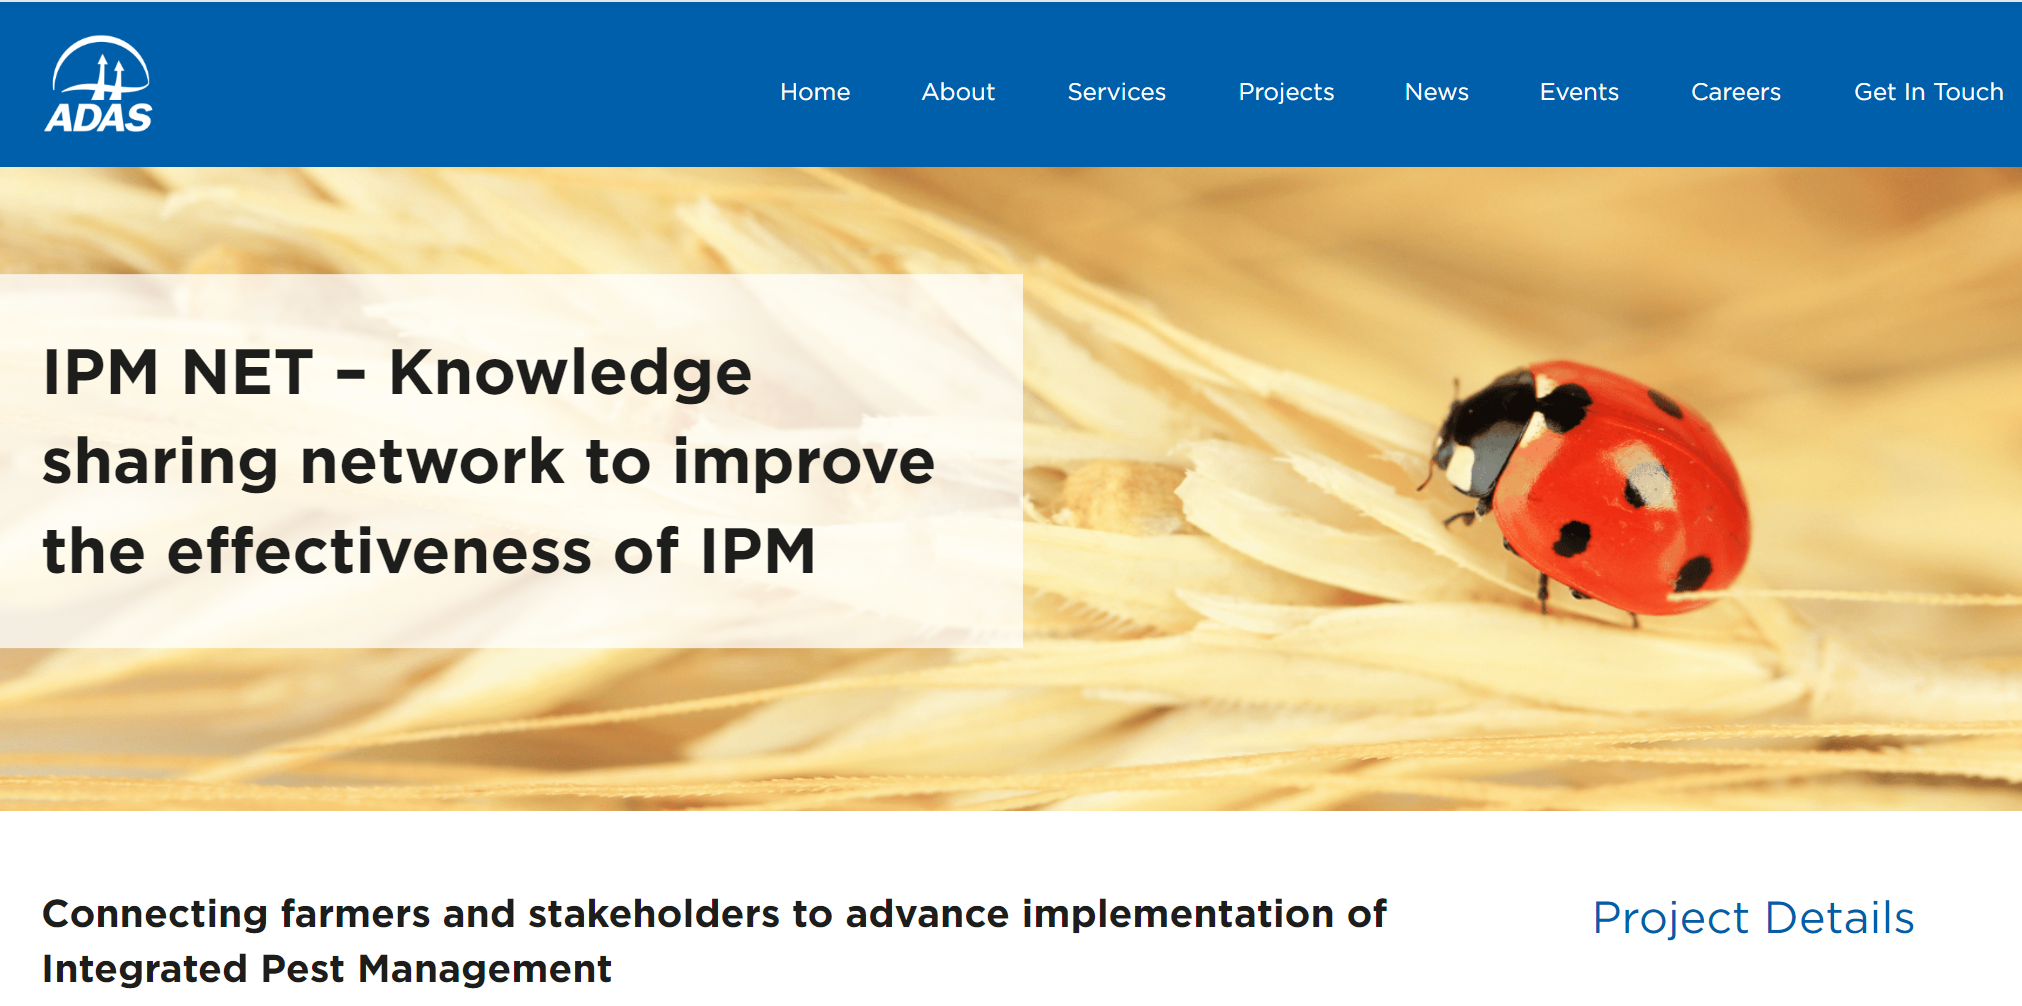 IPM NET initiative launched Image